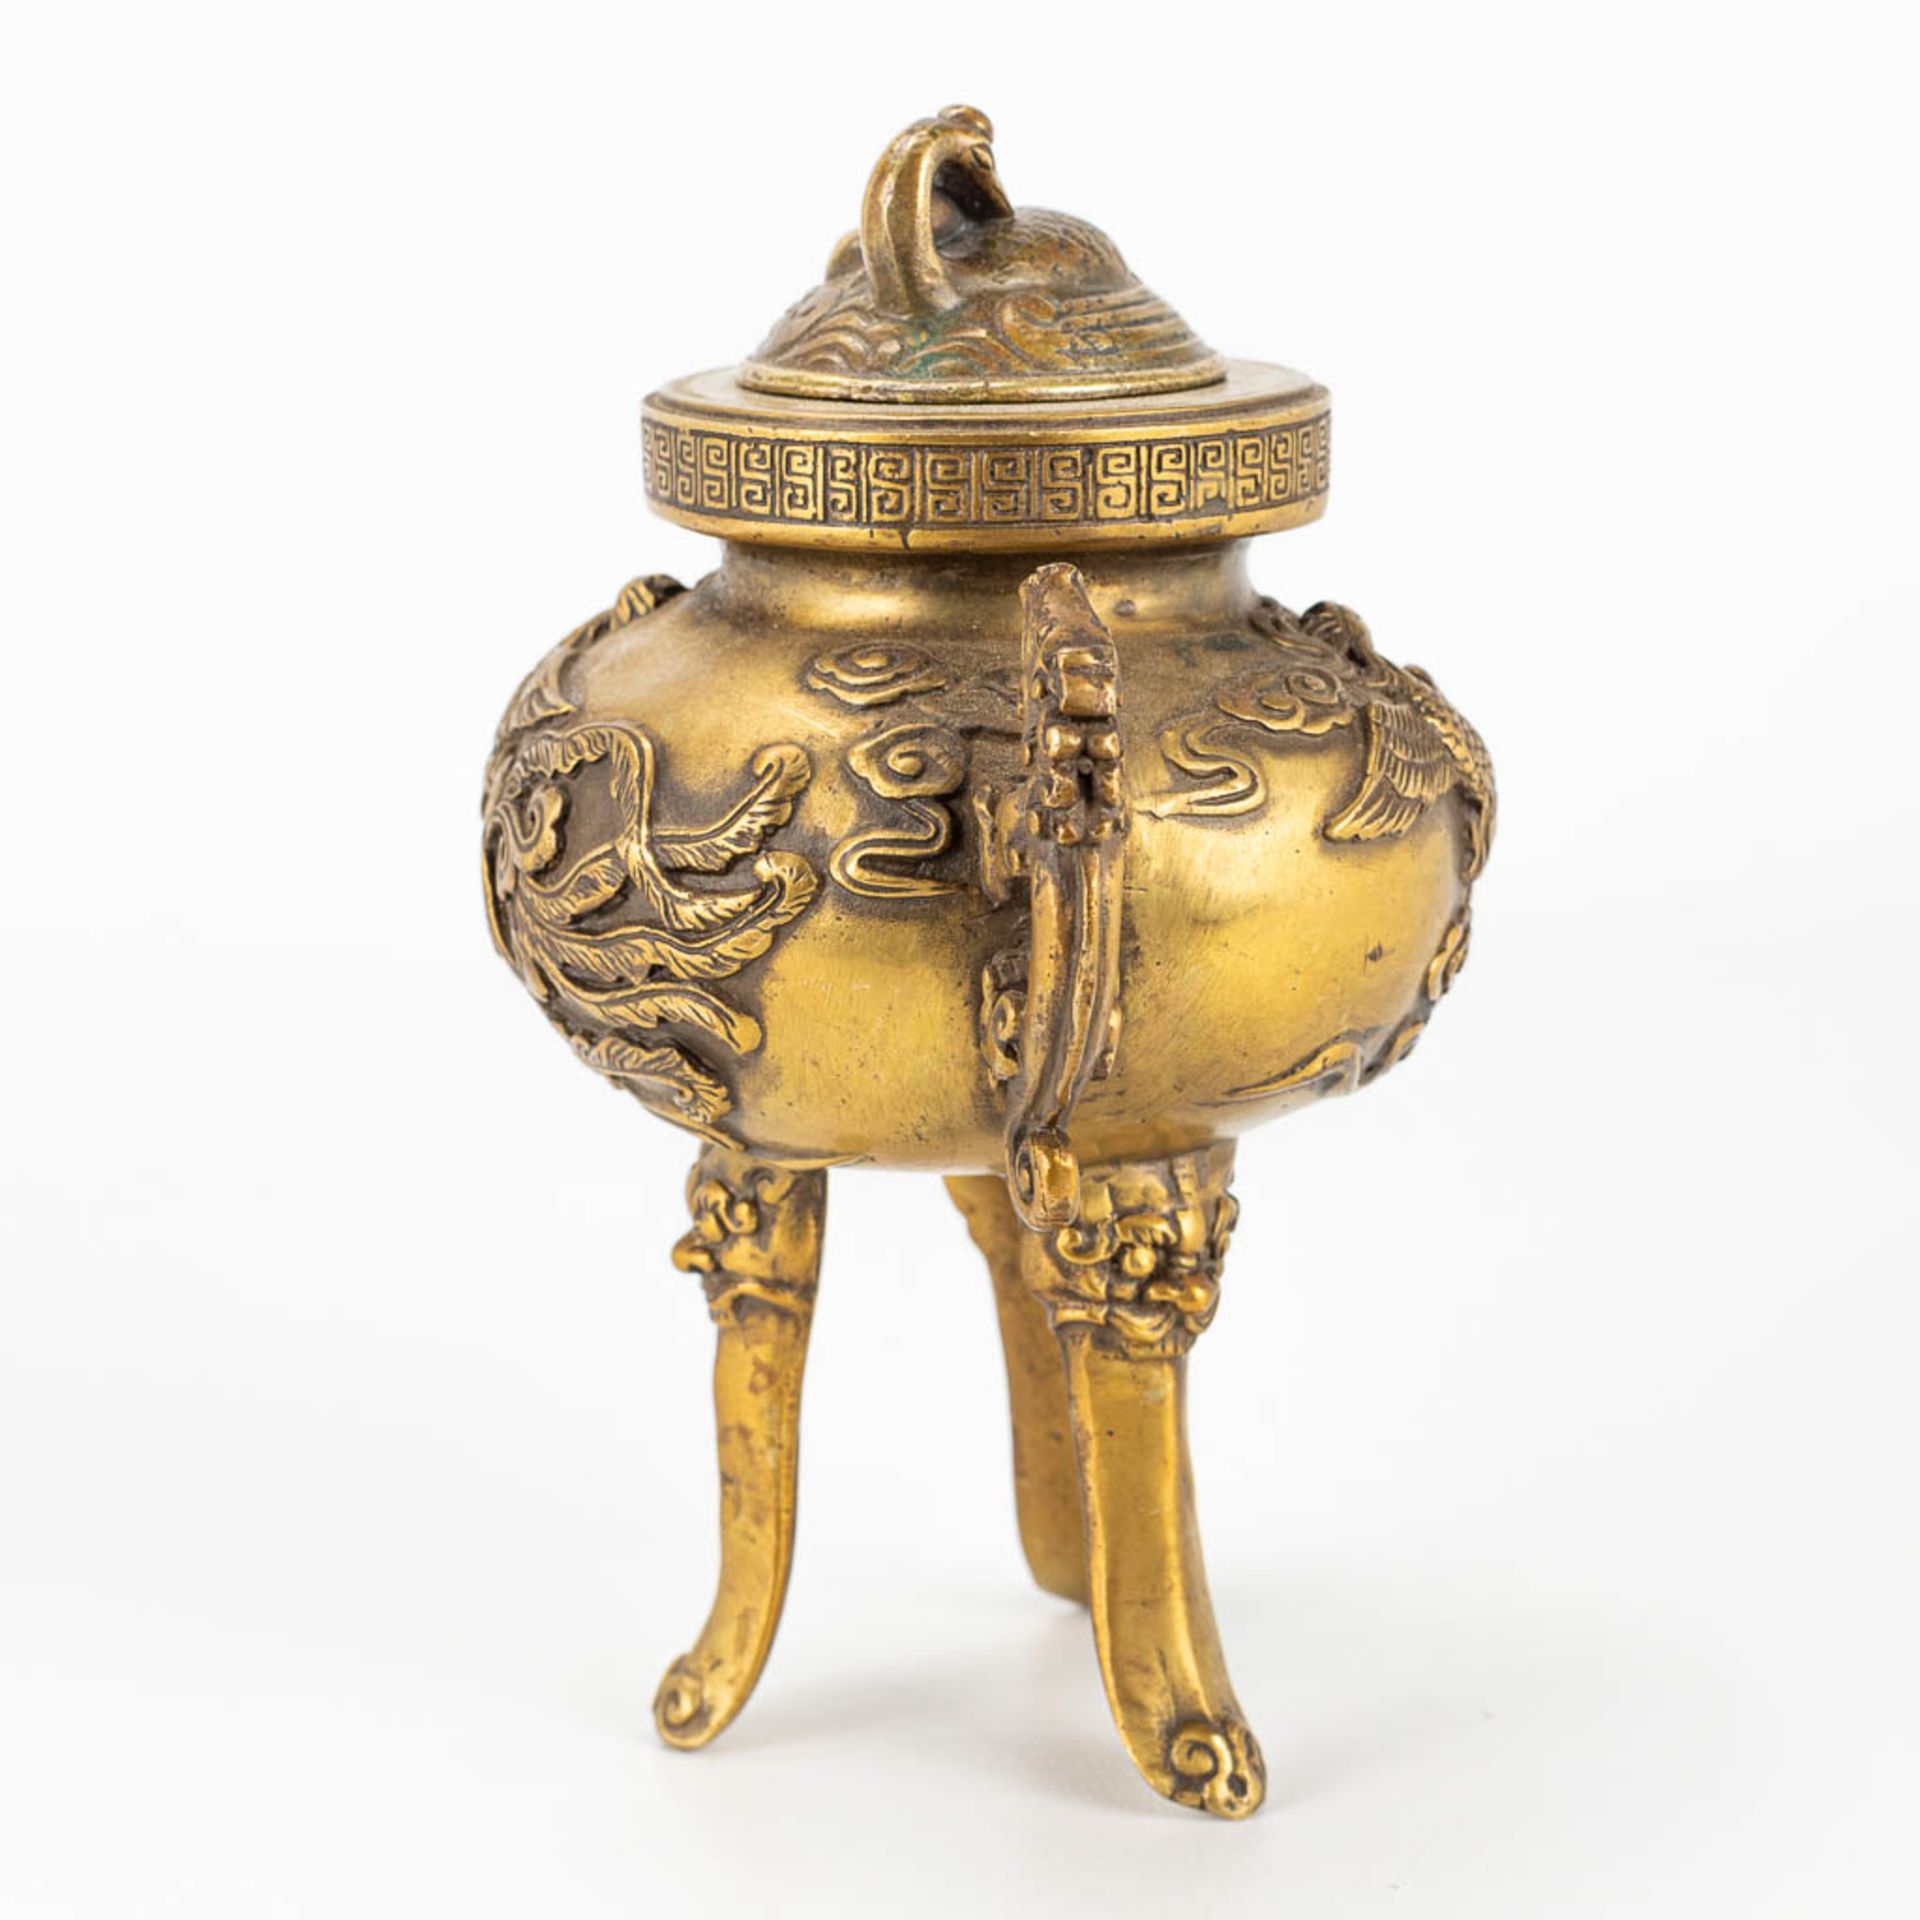 A bronze Koro Brule Parfum, decorated with dragons. - Image 3 of 12